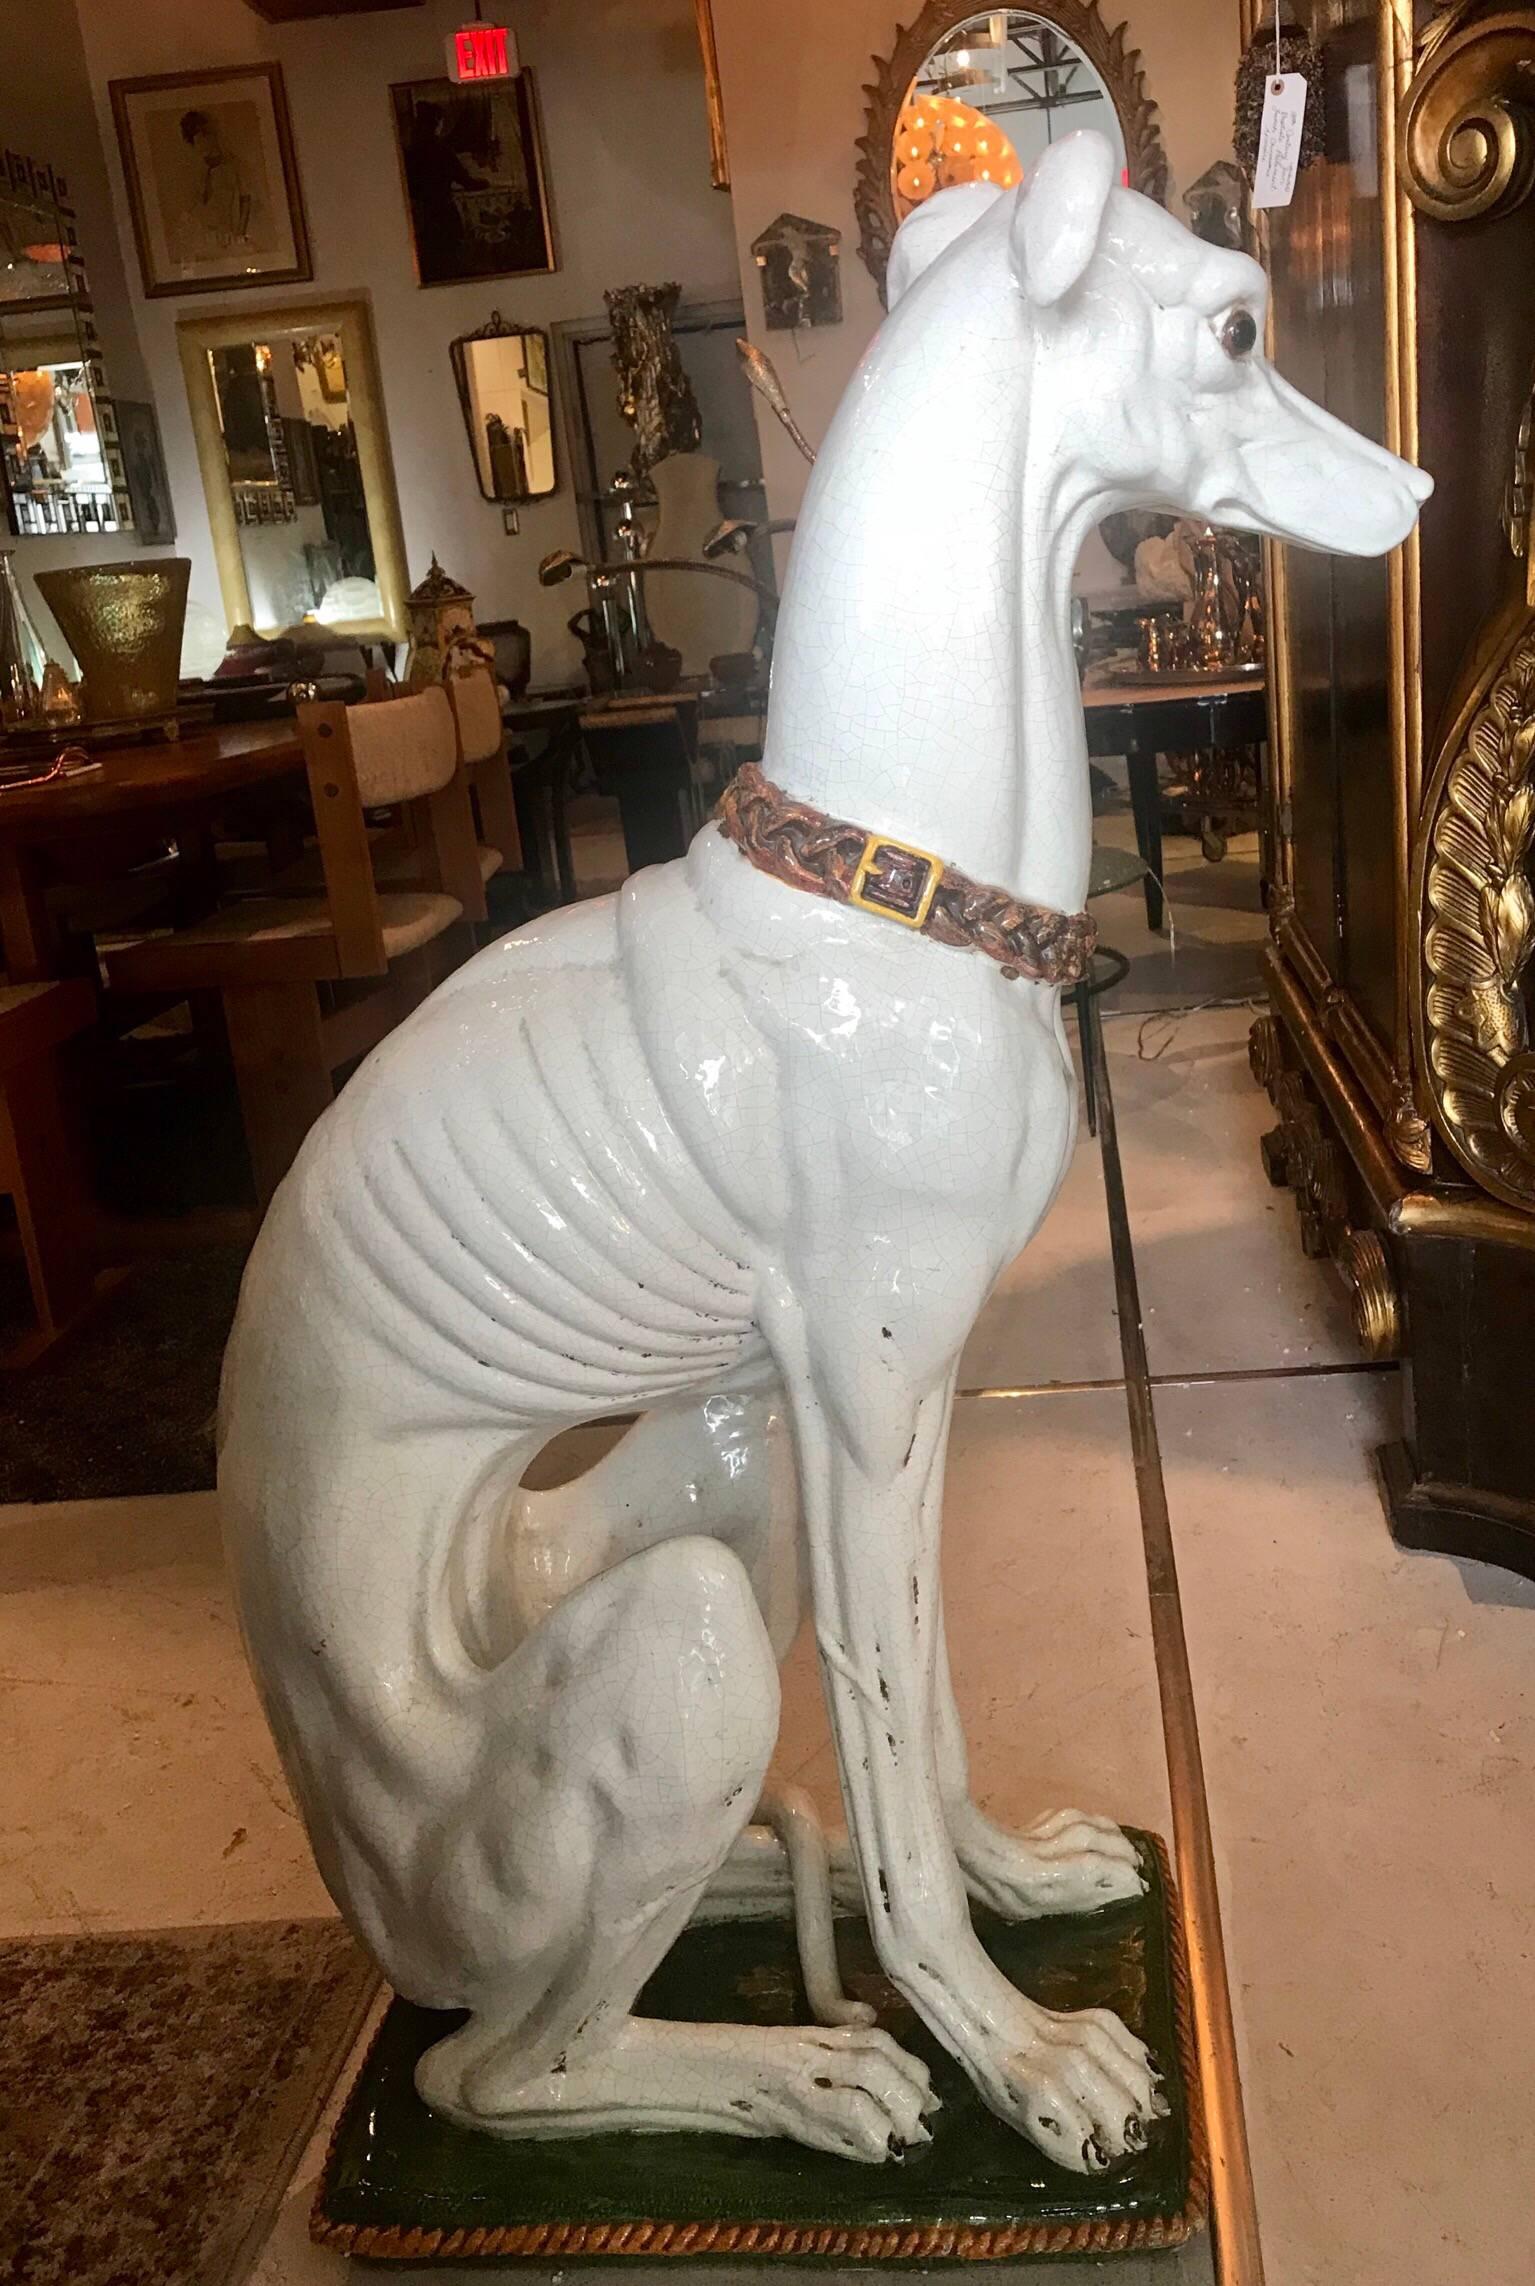 A lifesize, very detailed, ceramic sculpture of a whippet or greyhound dog seated on a green cushion with bronze colored trim and a dog collar. Made in Italy, circa 1950s.